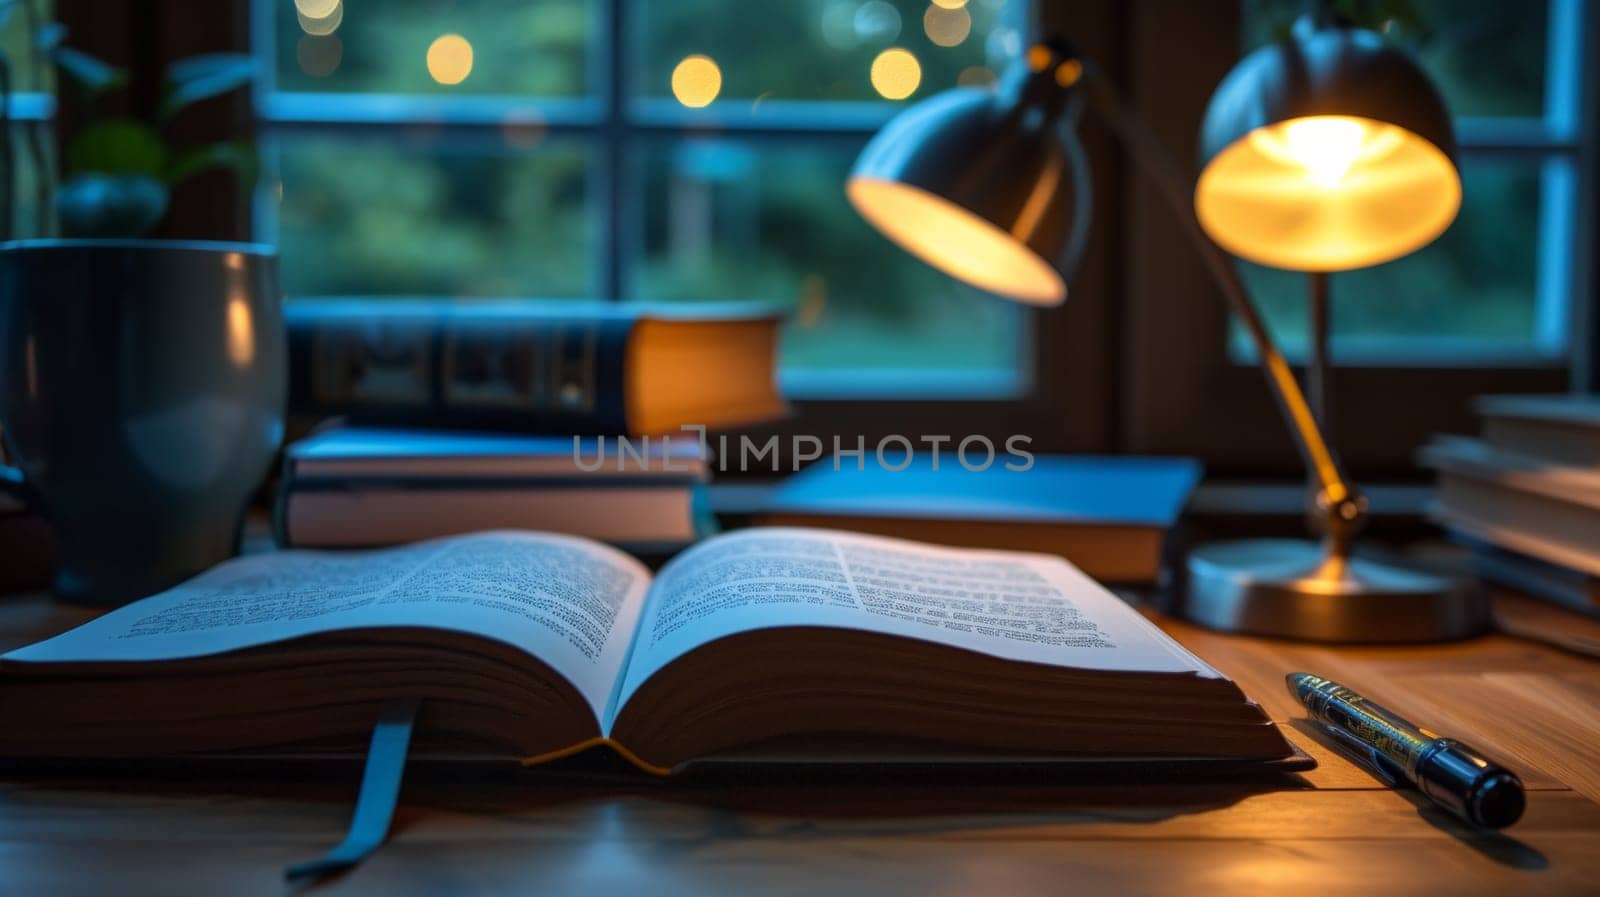 A book open on a table with two lamps and other items, AI by starush